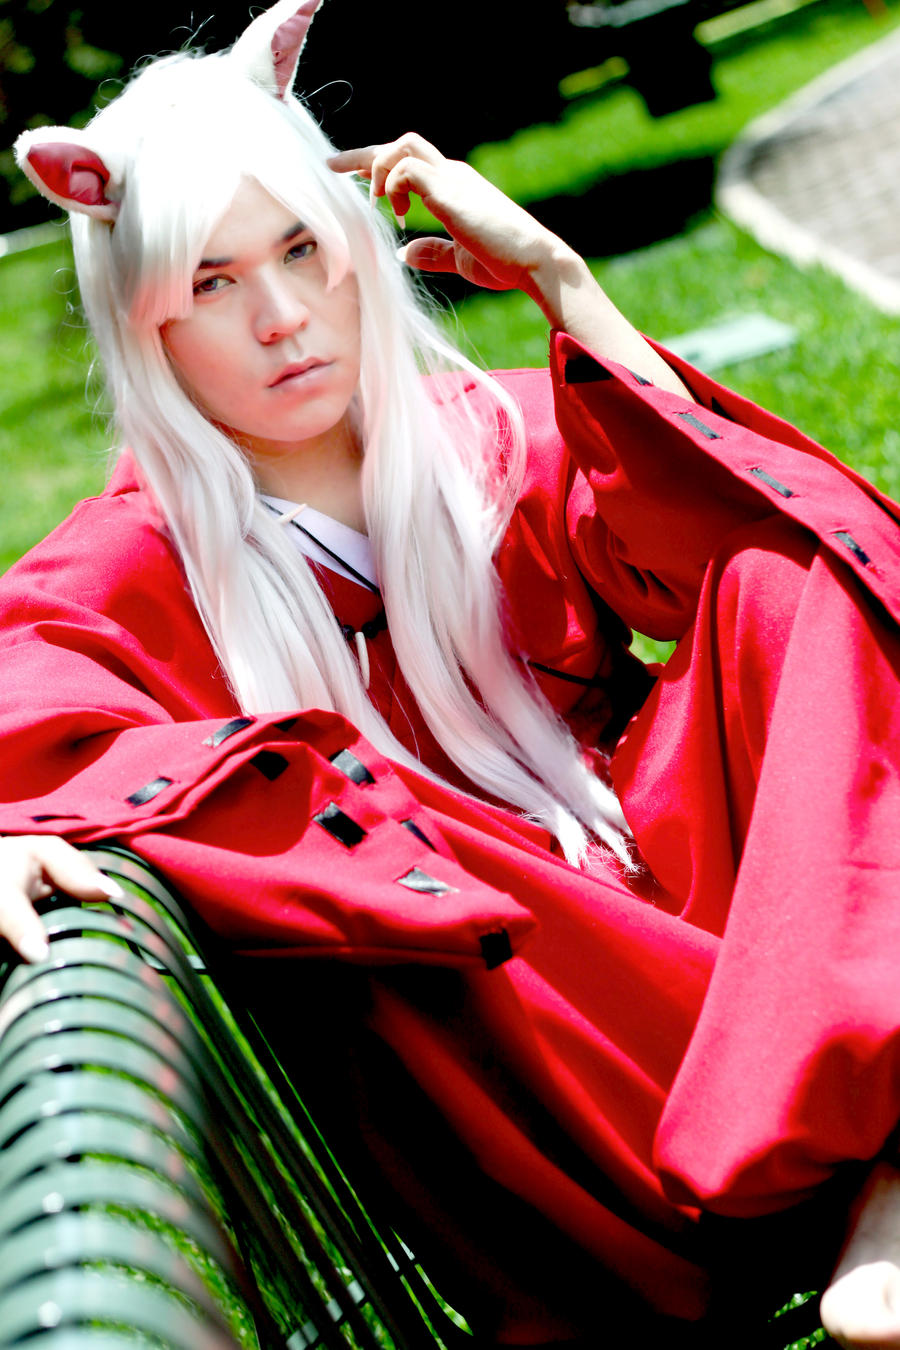 Inuyasha cosplay by stormclyde on DeviantArt